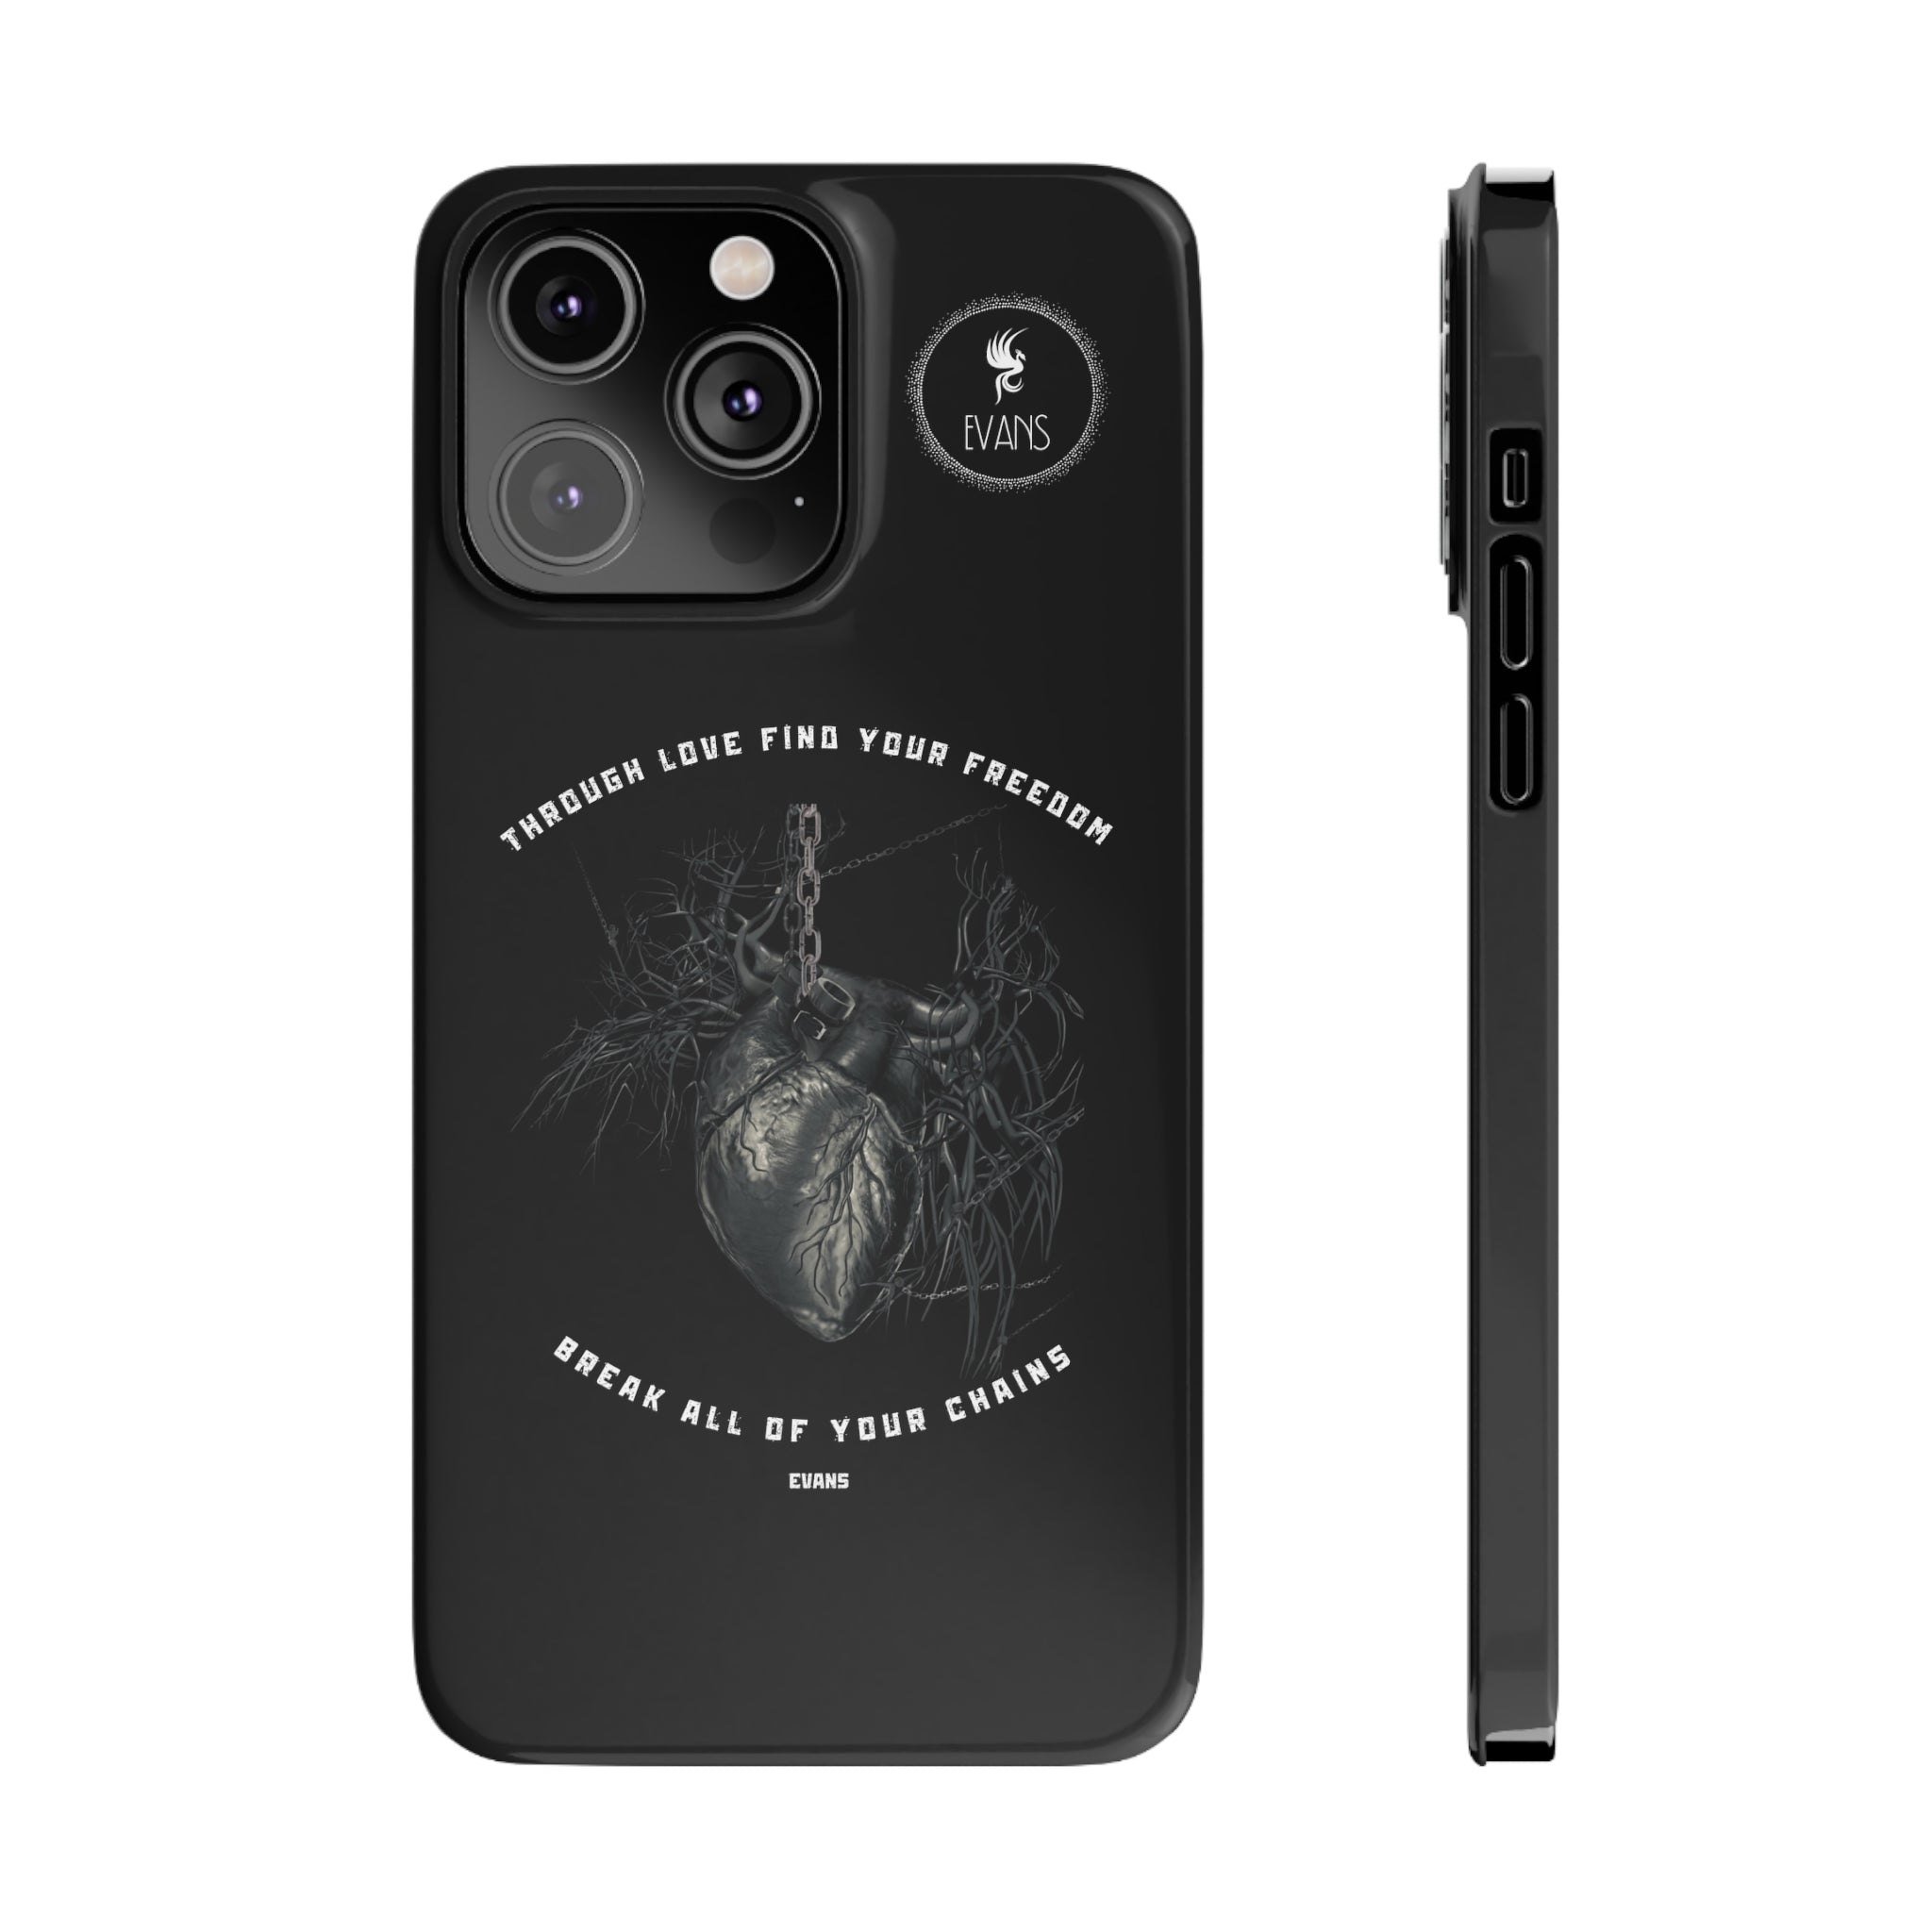 Evans - Brake all of your chains -Slim Phone Cases